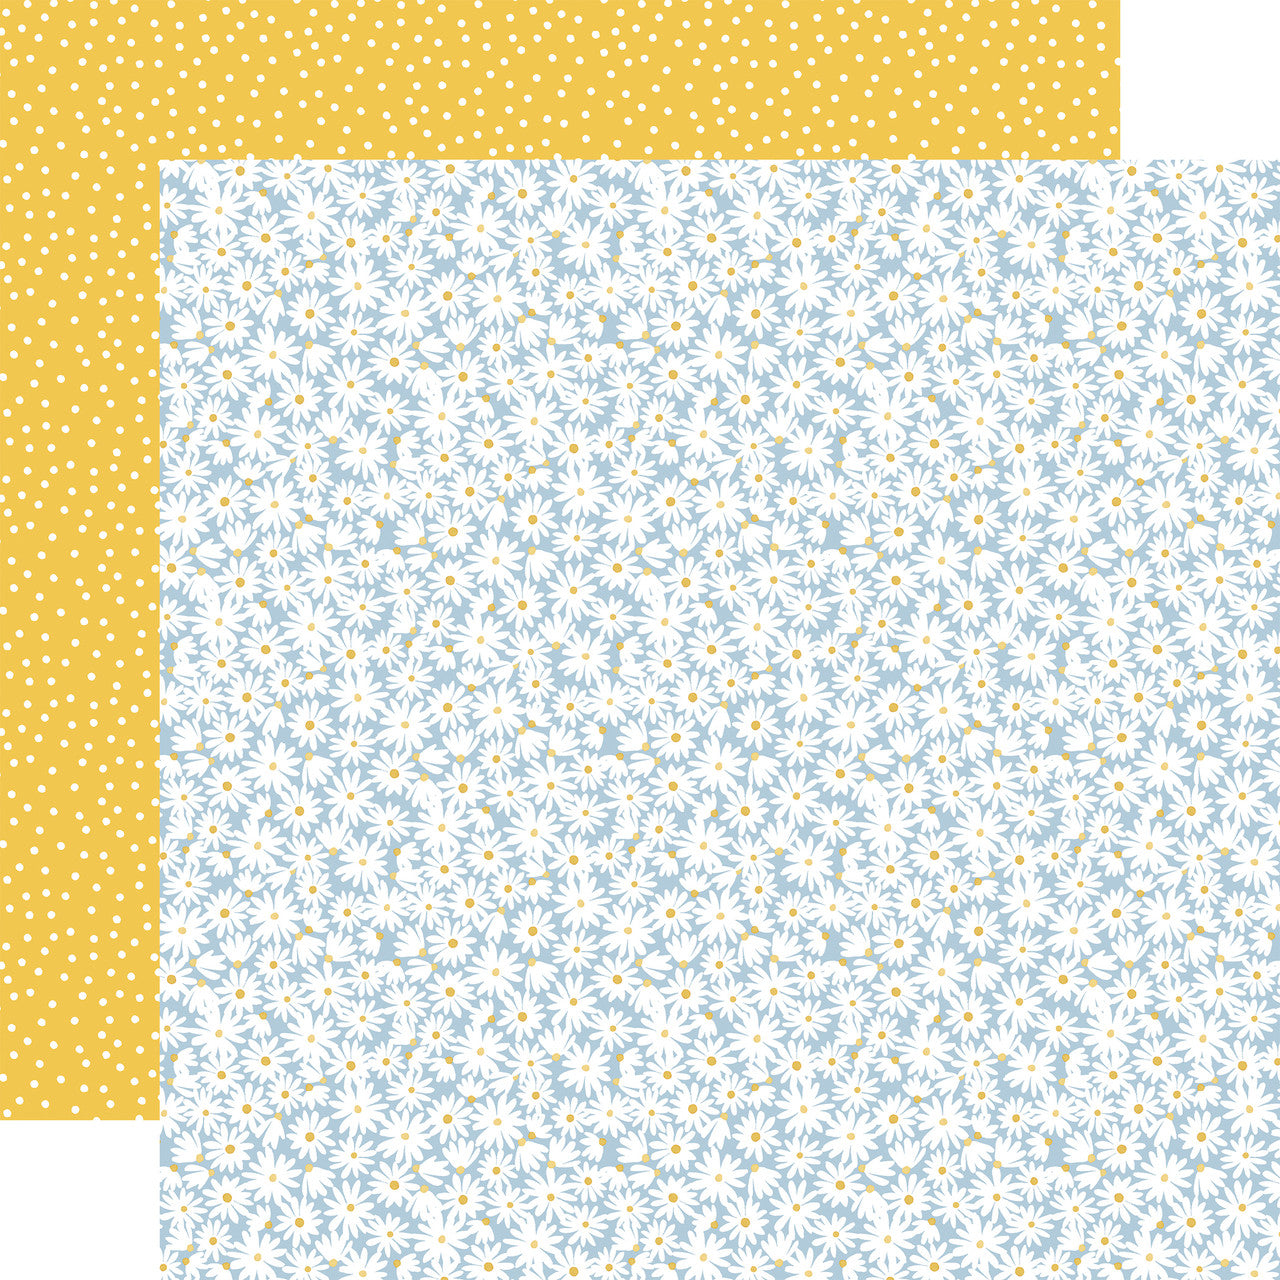 Here There and Everywhere Fresh Daisies Double-Sided Patterned Paper